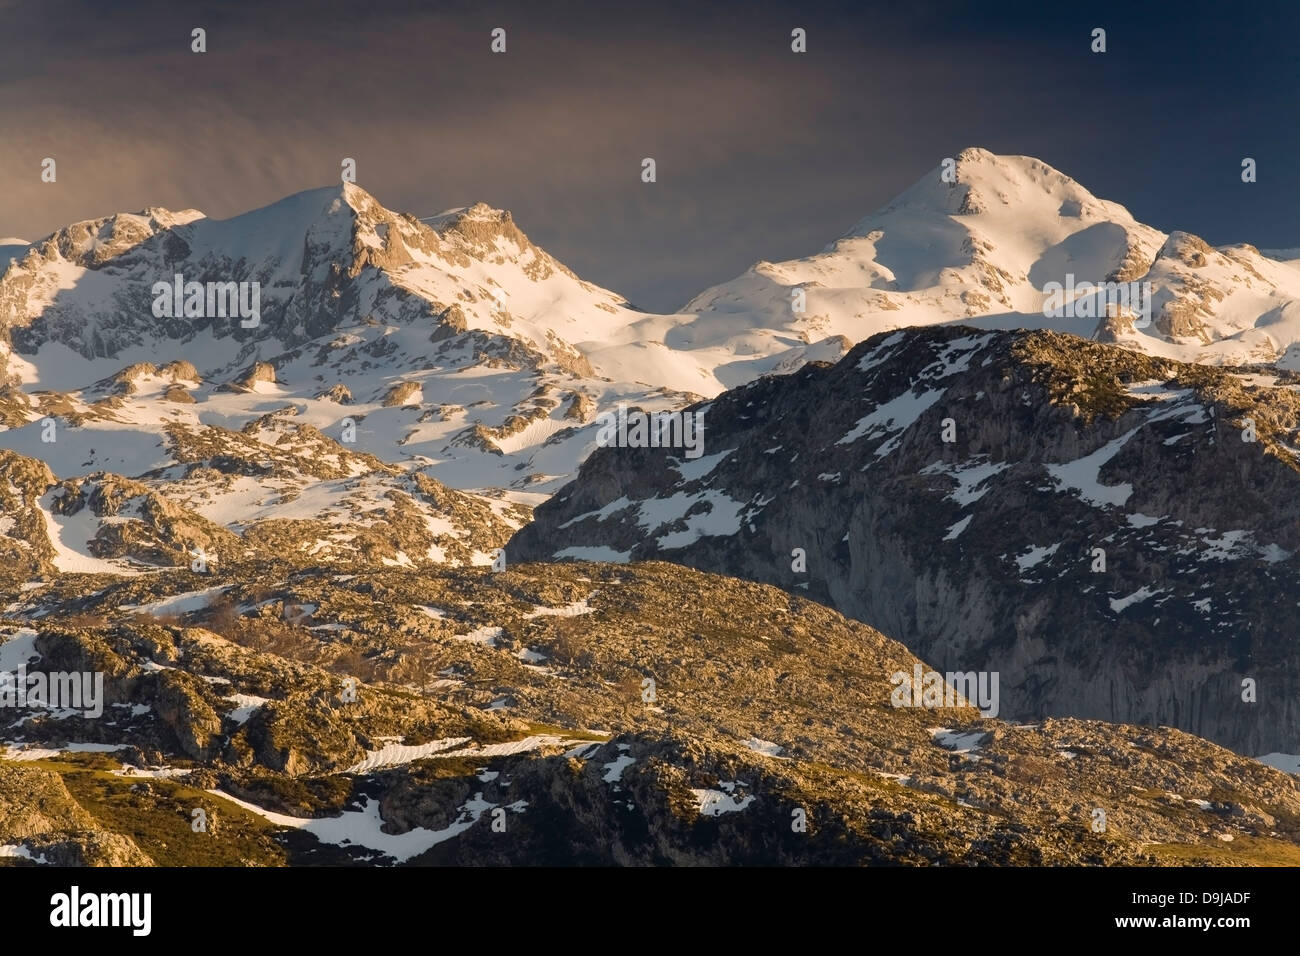 Snow-capped mountains landscape. Stock Photo